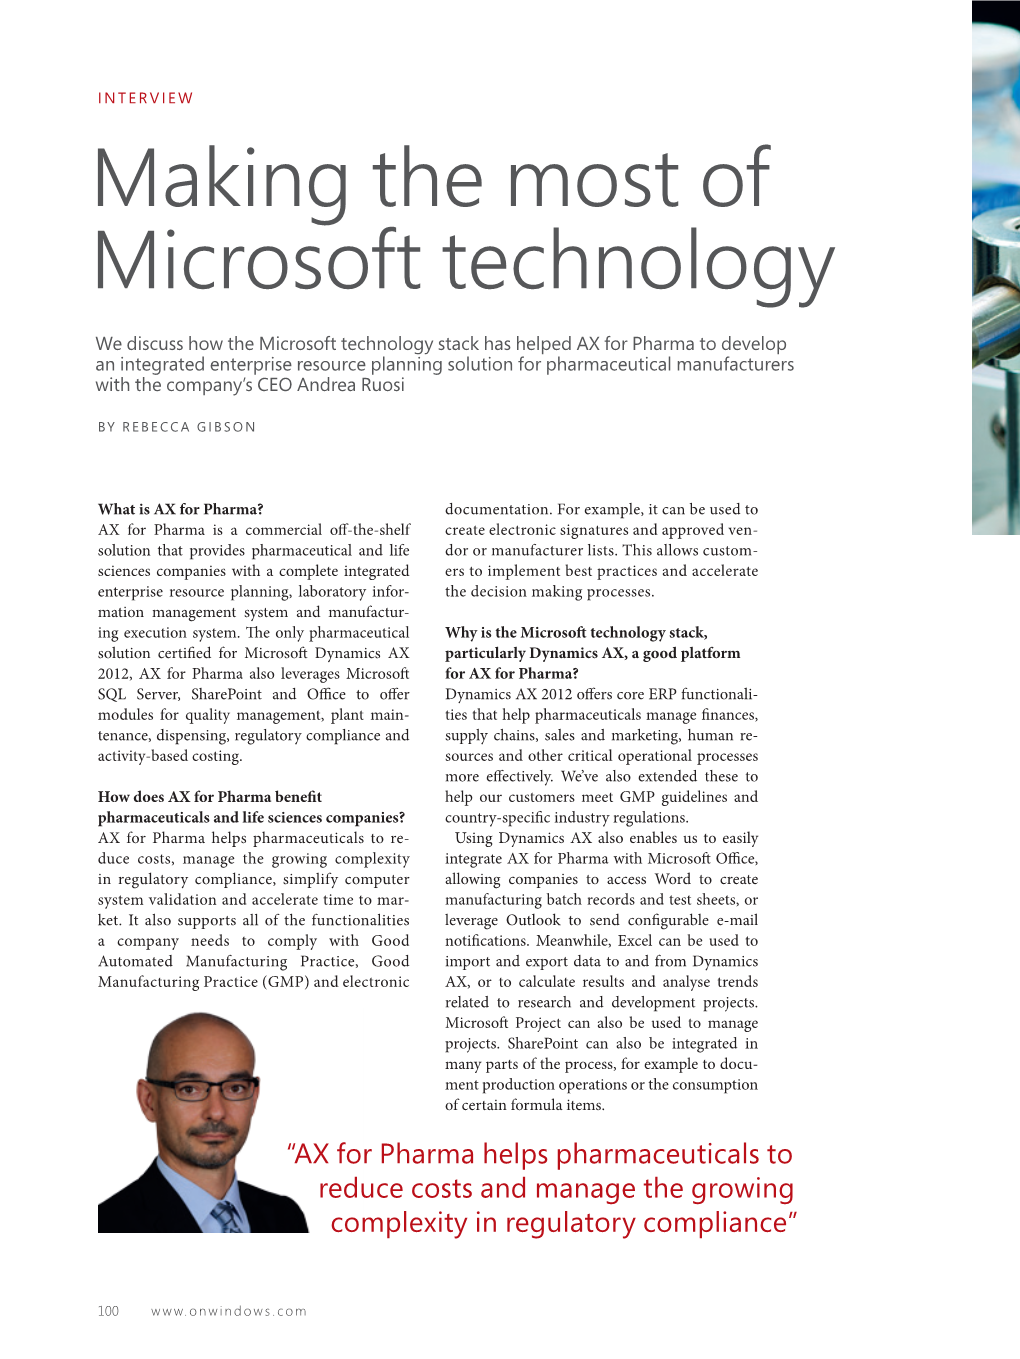 Making the Most of Microsoft Technology